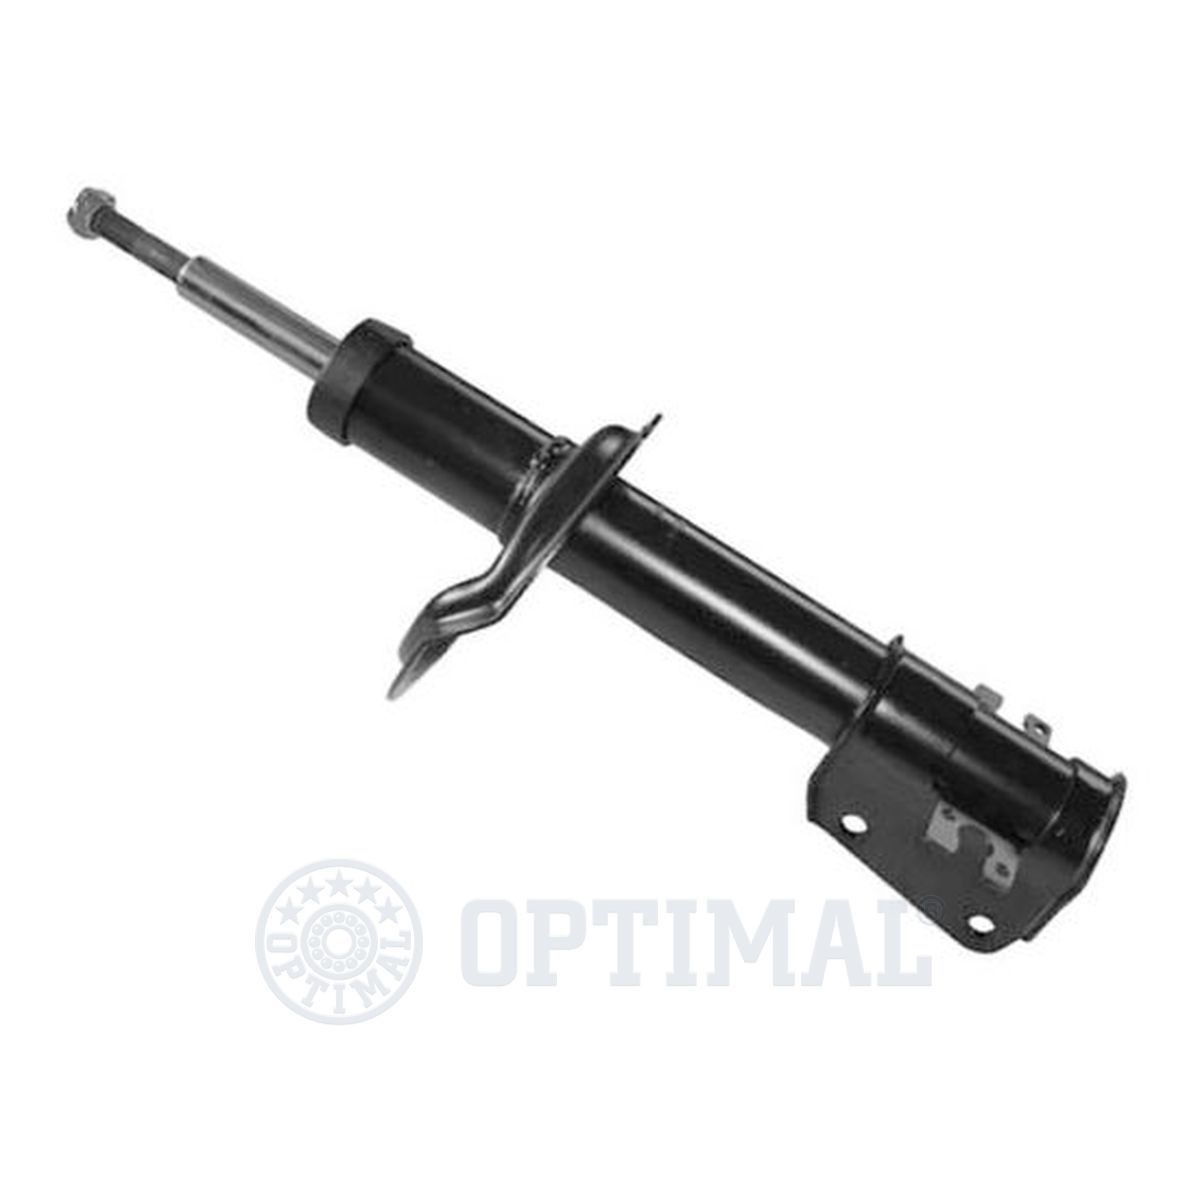 OPTIMAL Front Axle, Gas Pressure, Twin-Tube, Suspension Strut, Top pin, Bottom Clamp, M14x1,5 Shocks A-3400G buy